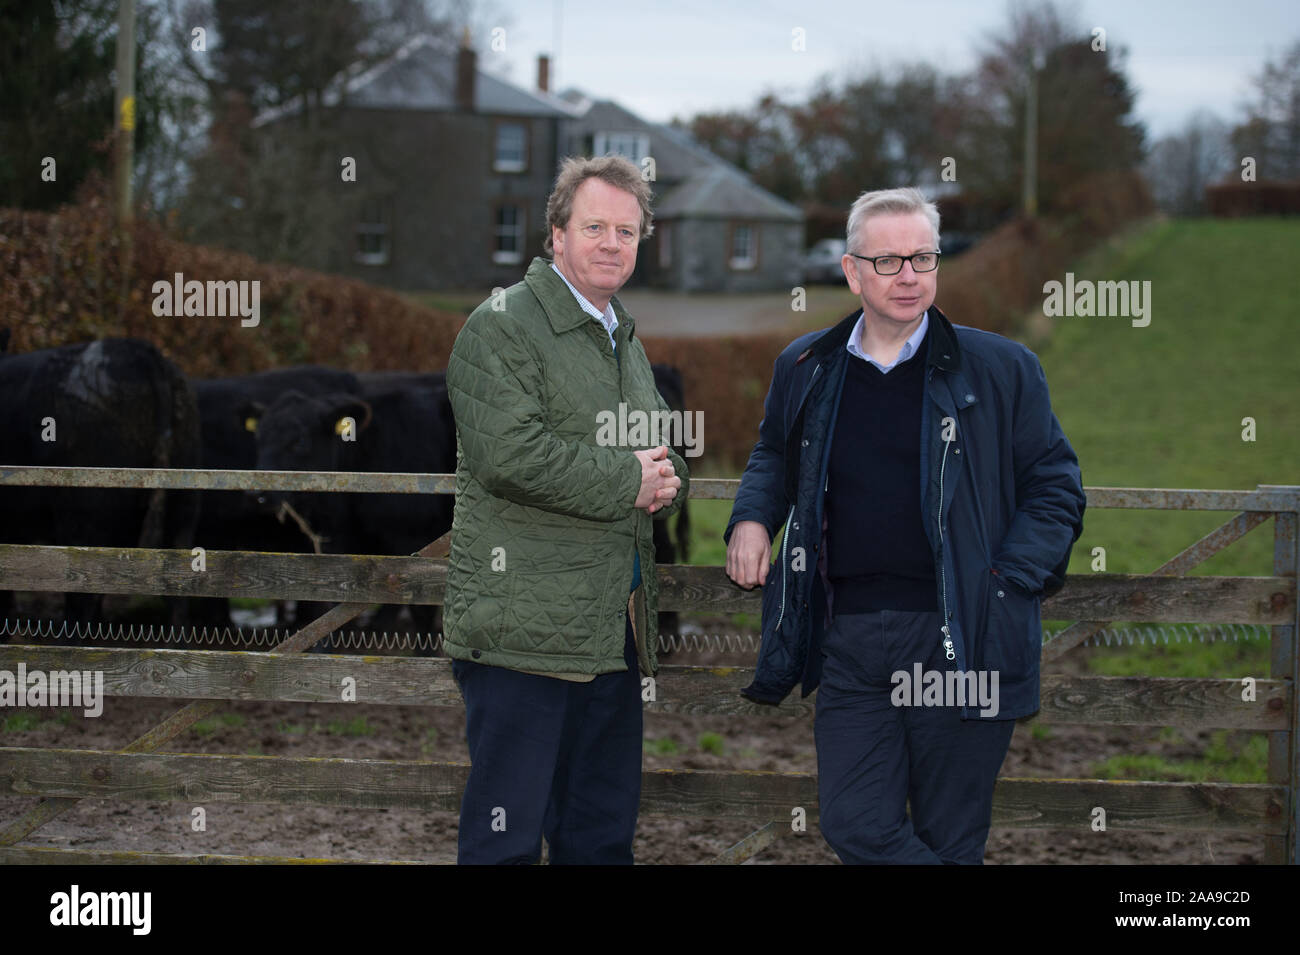 EMBARGOED UNTIL 17:30 TODAY (20TH NOVEMBER 2019) Glasgow, UK. 20th Nov, 2019. Pictured: (L-R) Alister Jack MP - Secretary of State for Scotland; Michael Gove MP - Chancellor of the Duchy of Lancaster. Mr Gove is seen campaigning in Scotland to secure the tory vote for the General Election on the 12th December. Credit: Colin Fisher/Alamy Live News Stock Photo